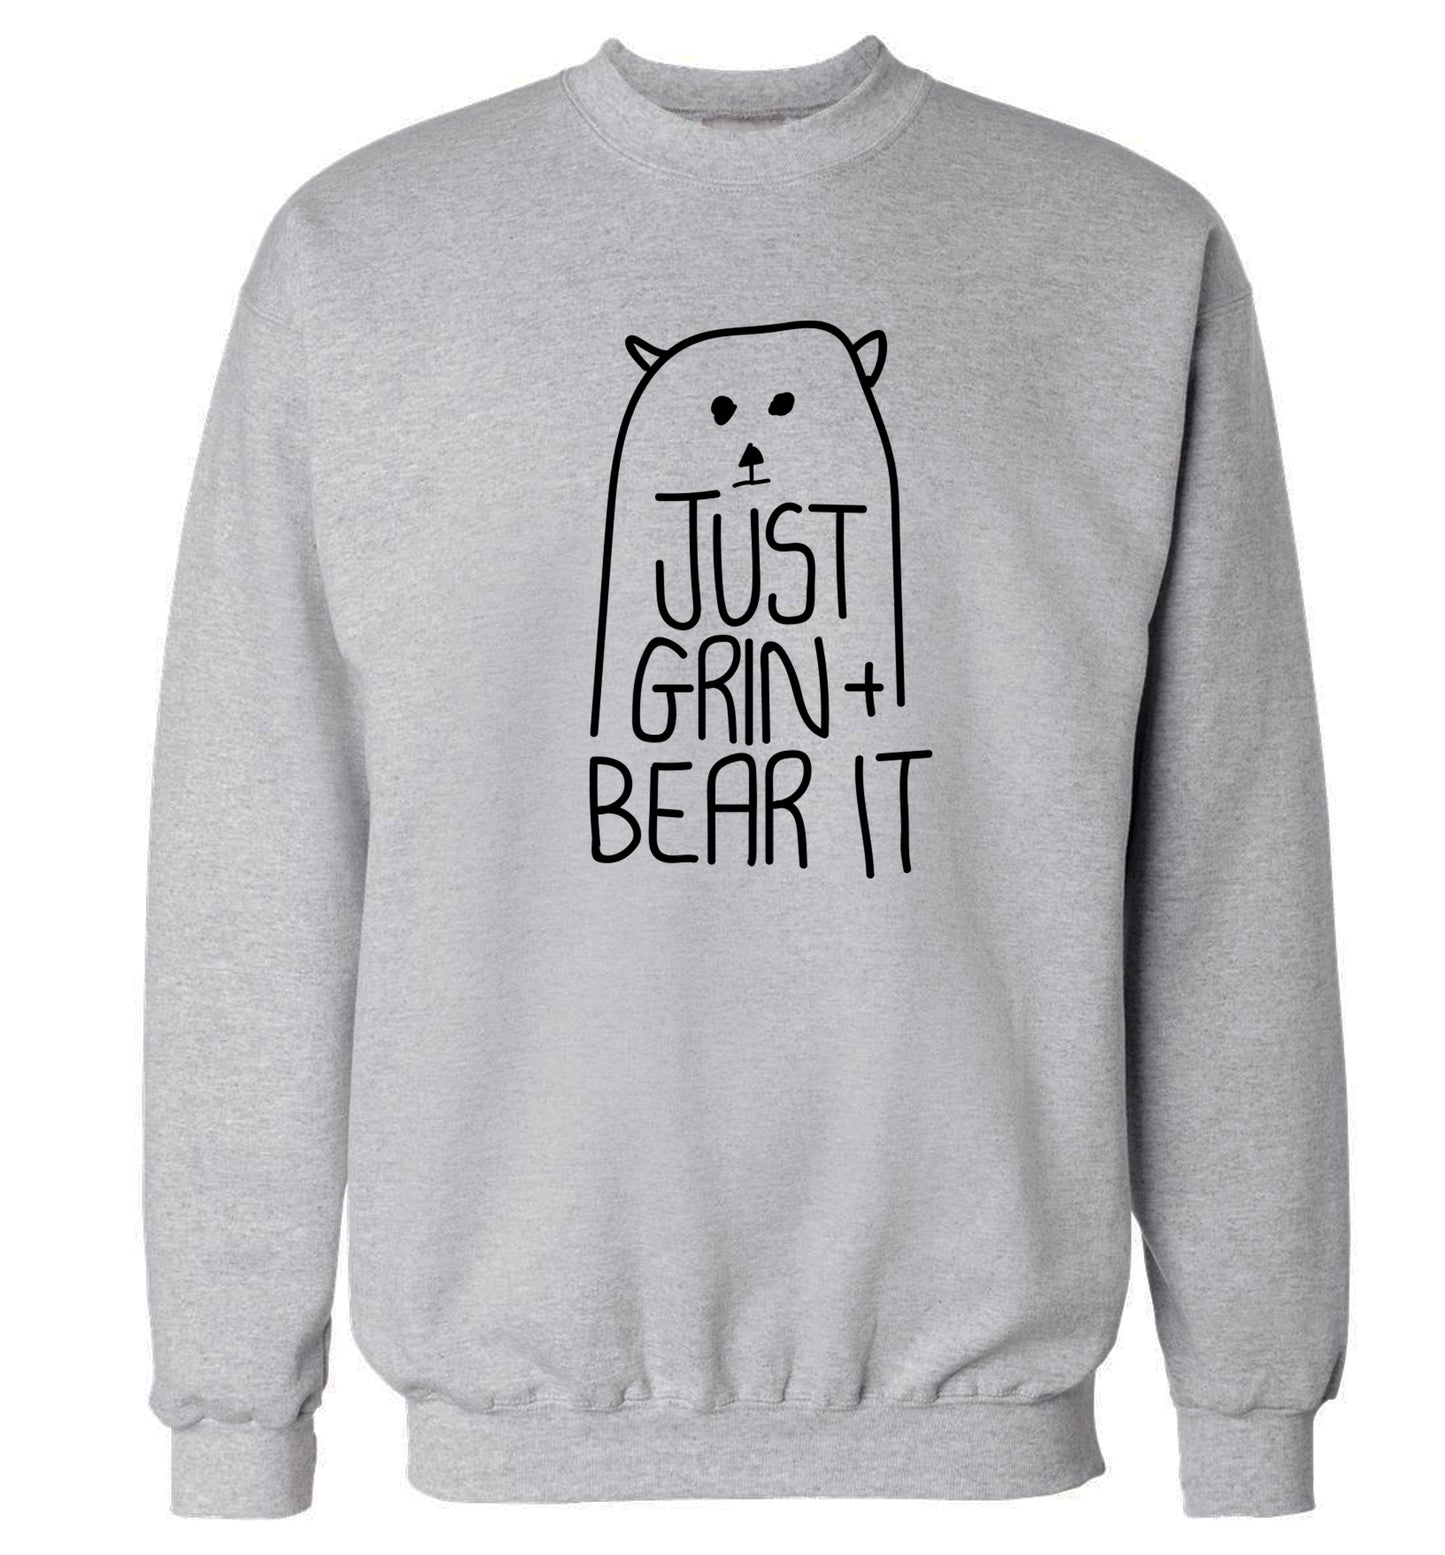 Just grin and bear it Adult's unisex grey Sweater 2XL